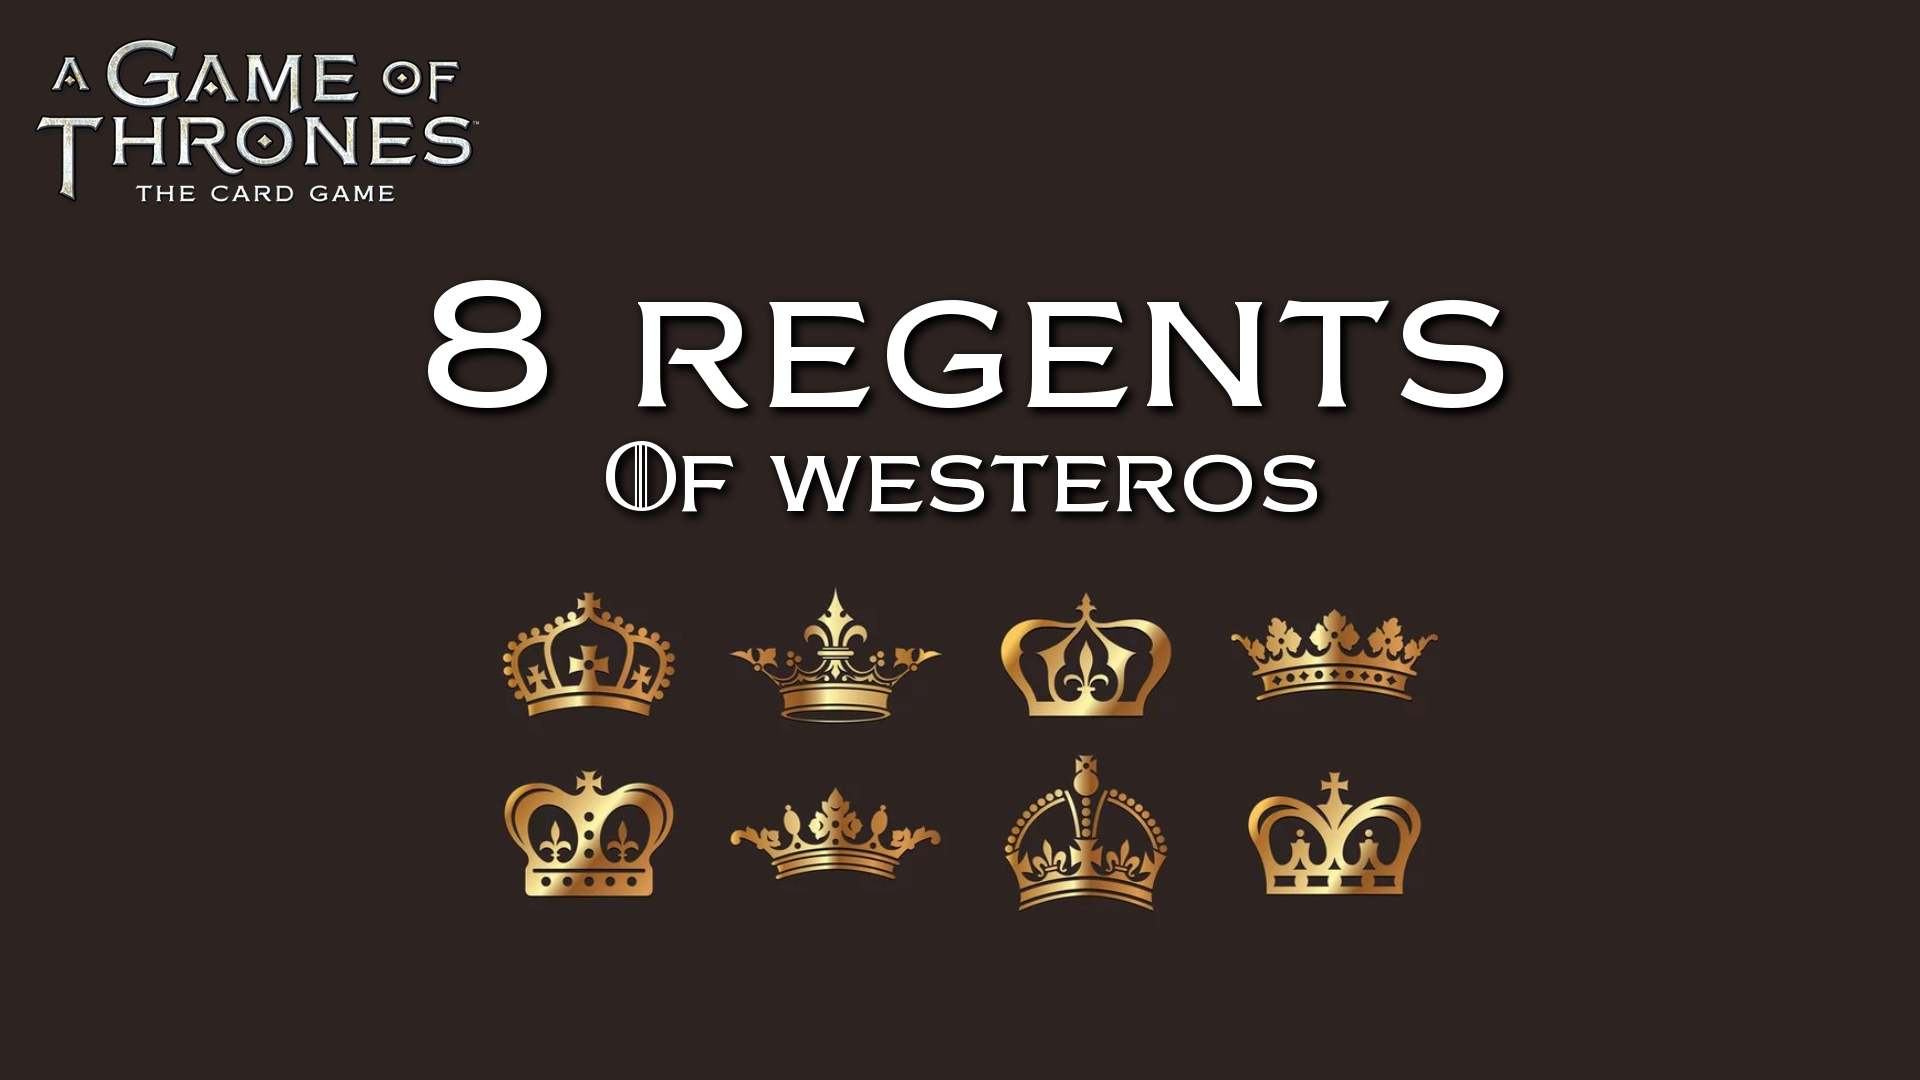 The 8 Regents of Westeros 2023